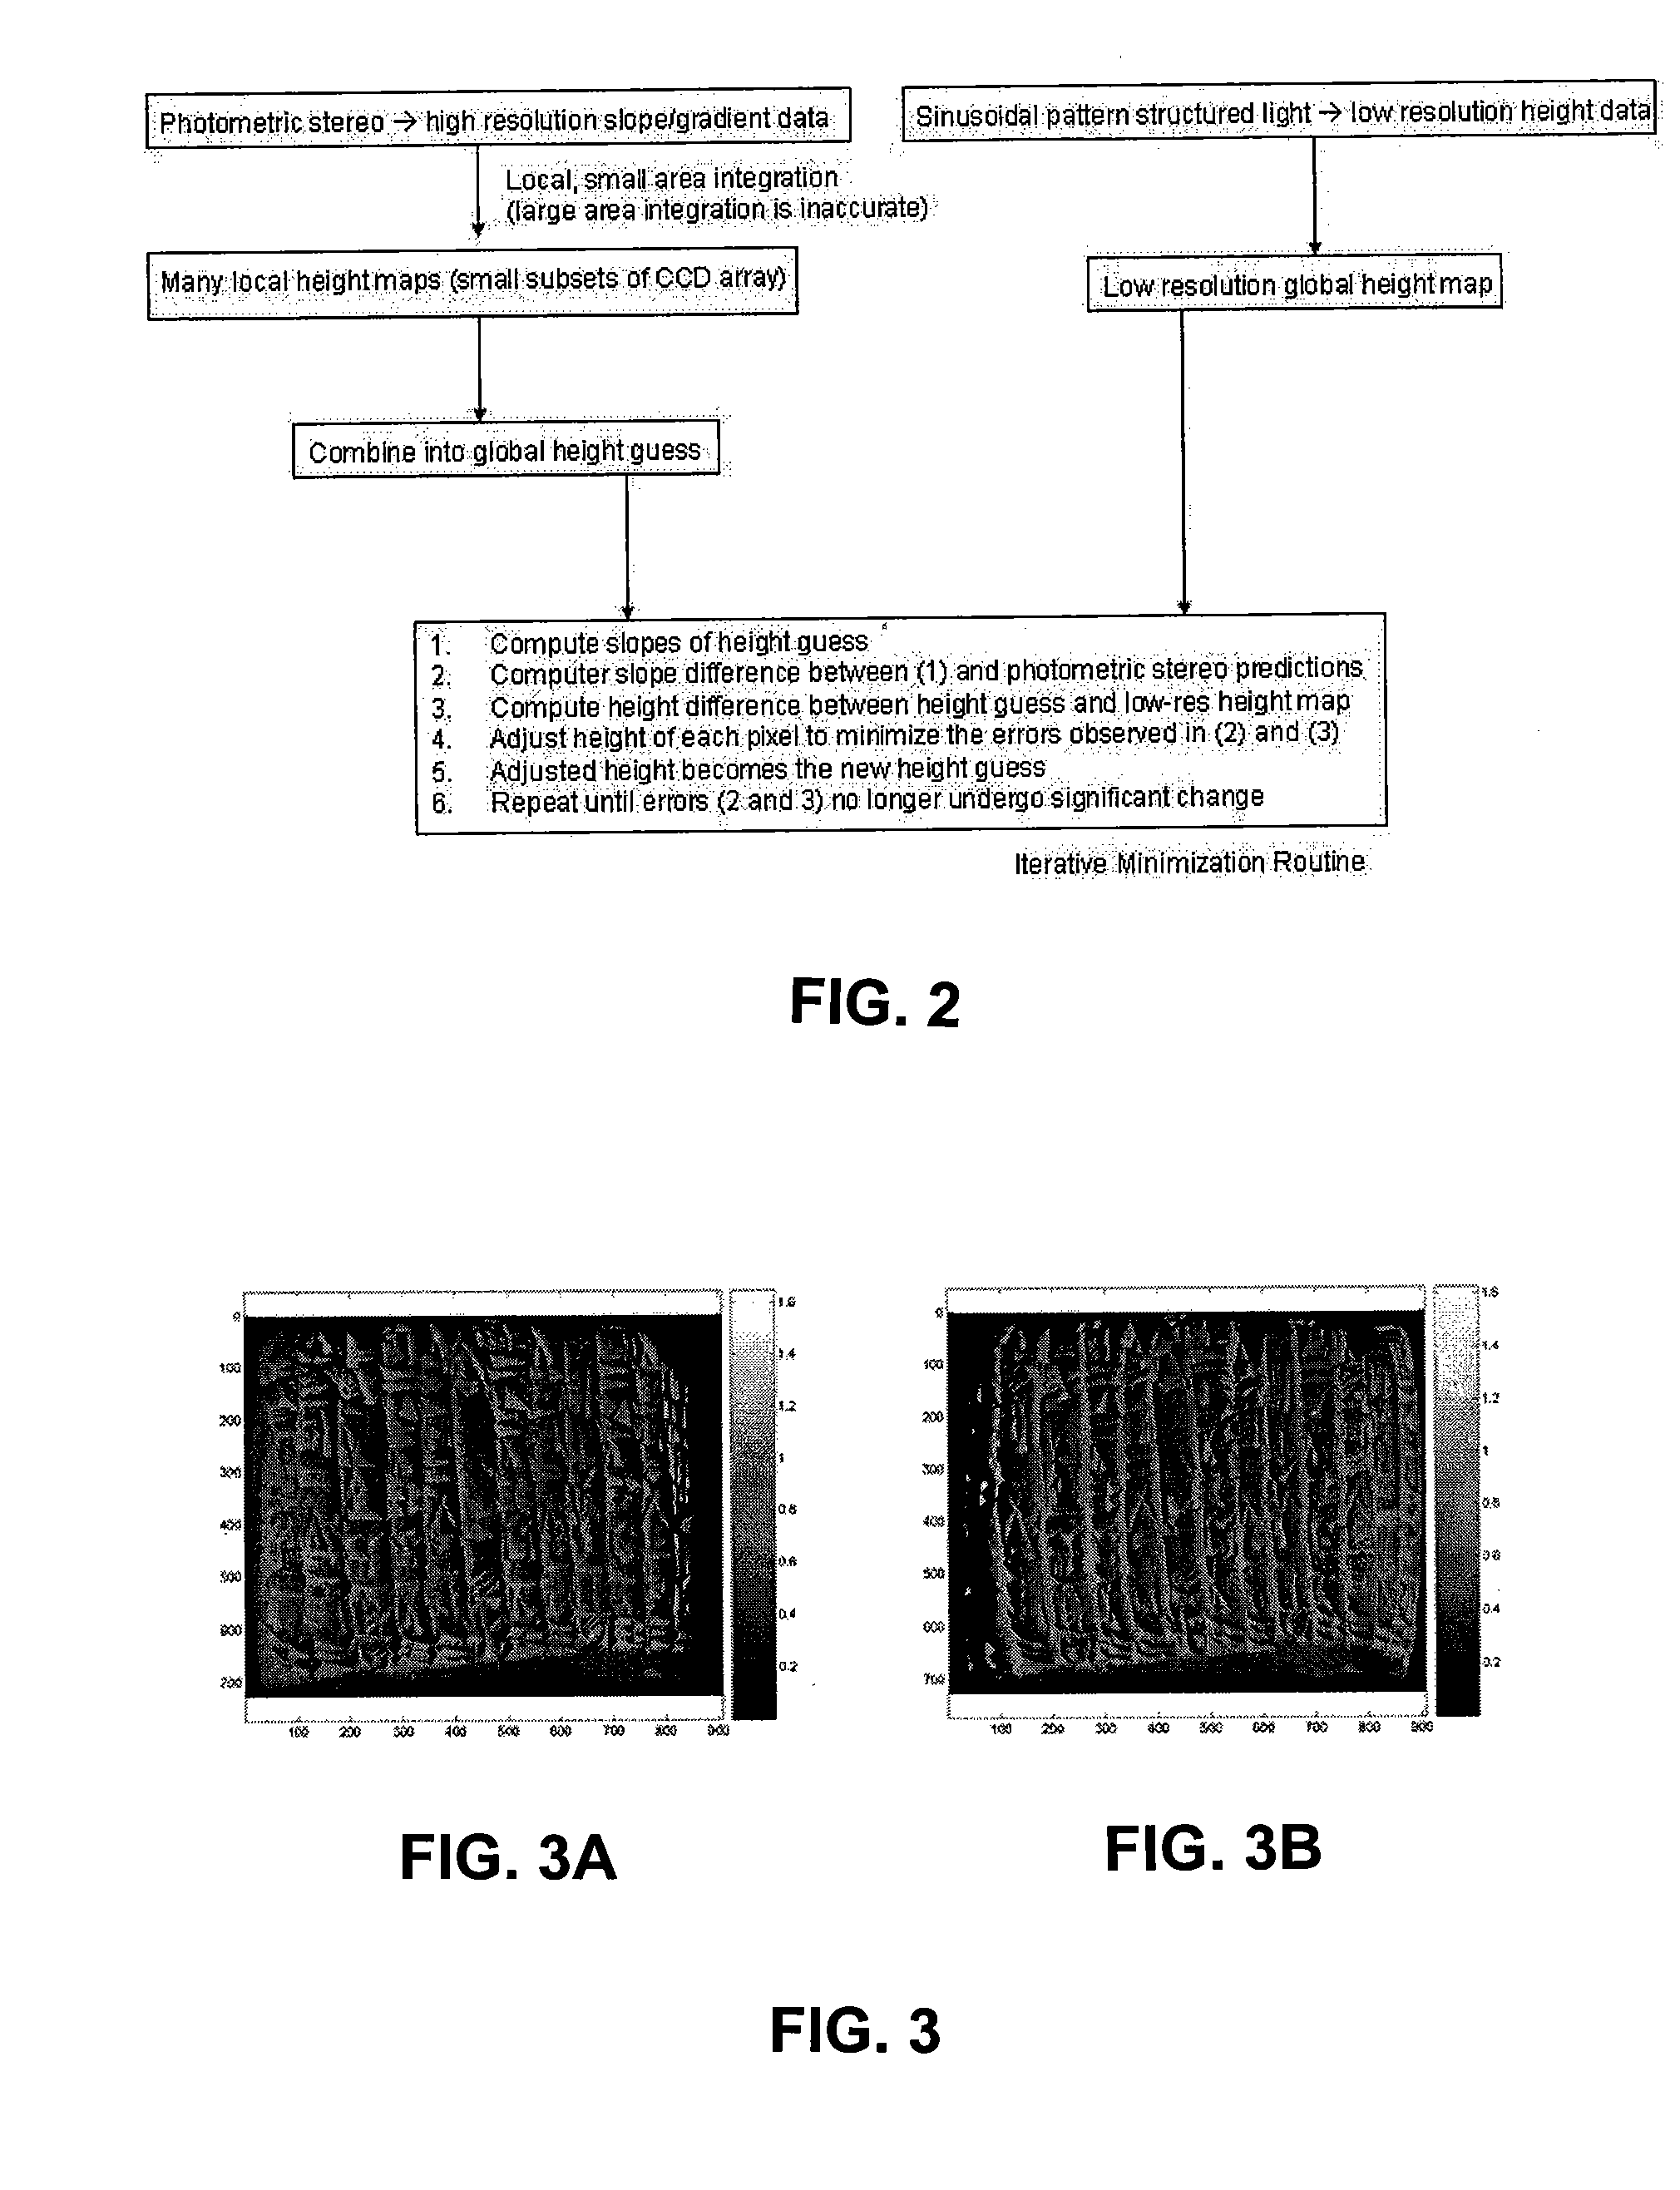 Apparatus and Method for 3-Dimensional Scanning of an Object